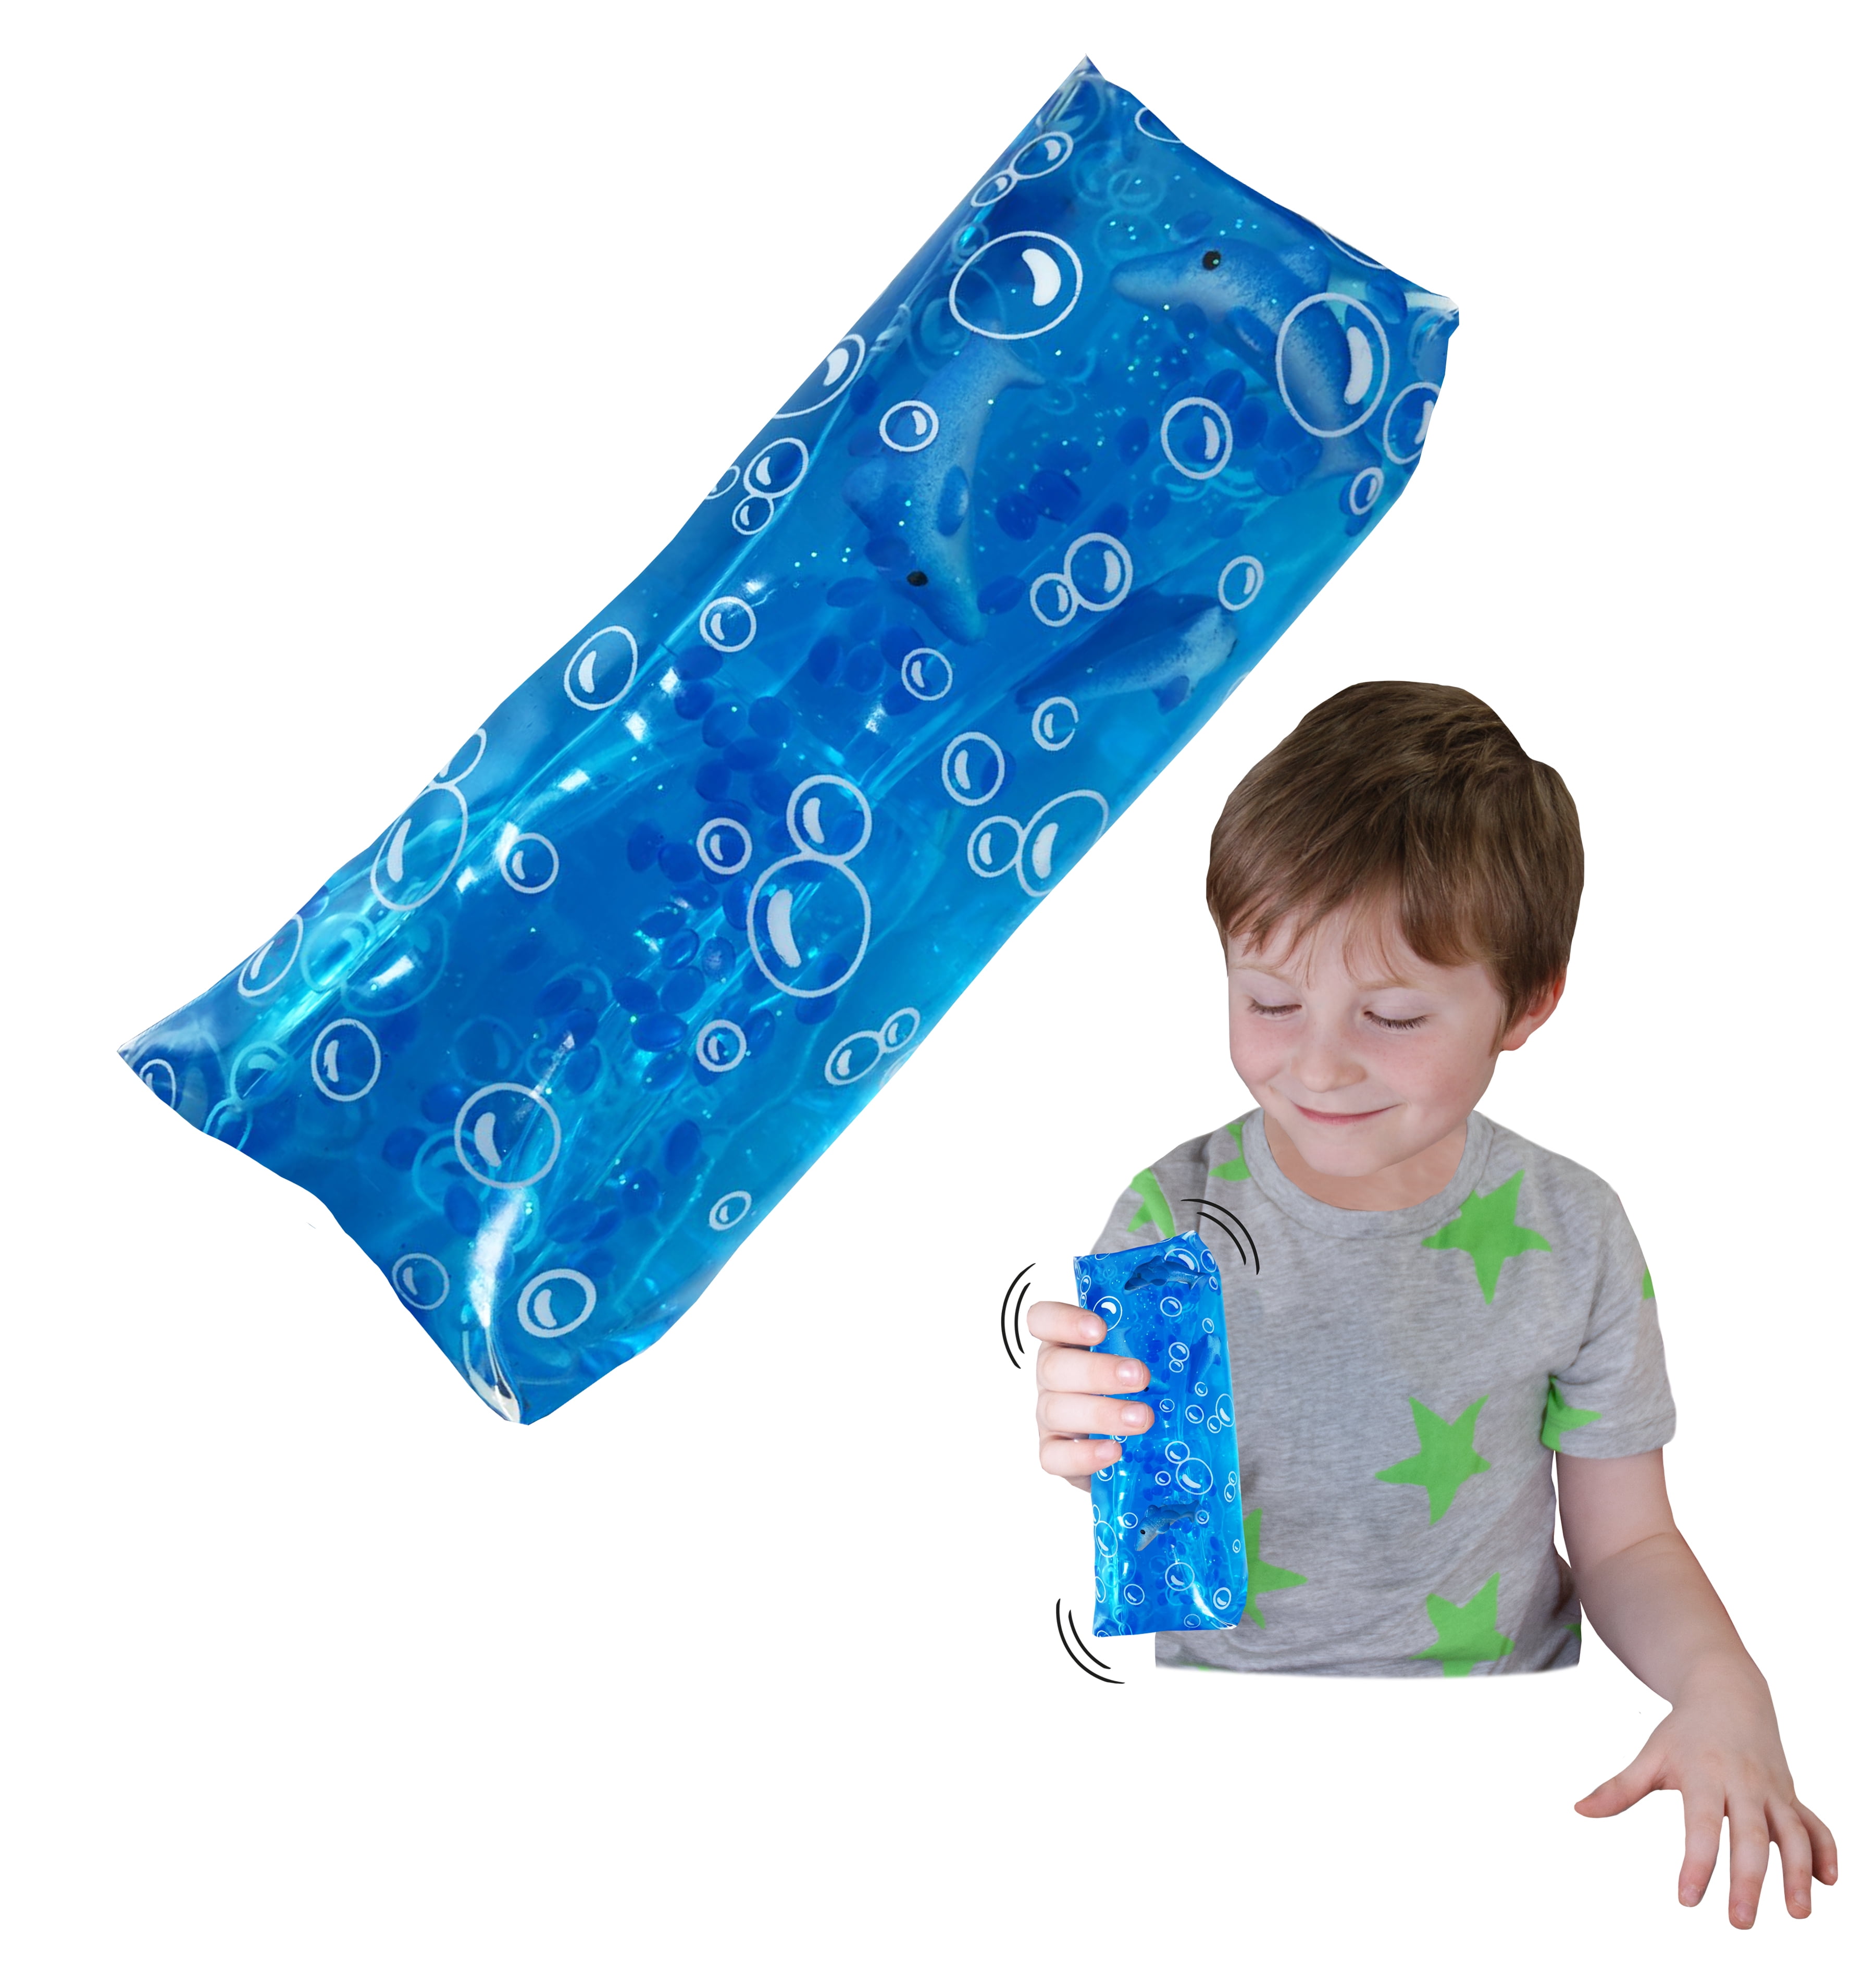 Wiggly Jiggly - Sharks and Dolphins from Deluxebase. Large super squishy water snake fidget toy with dolphin and shark Great sensory toy for ADHD - Walmart.com